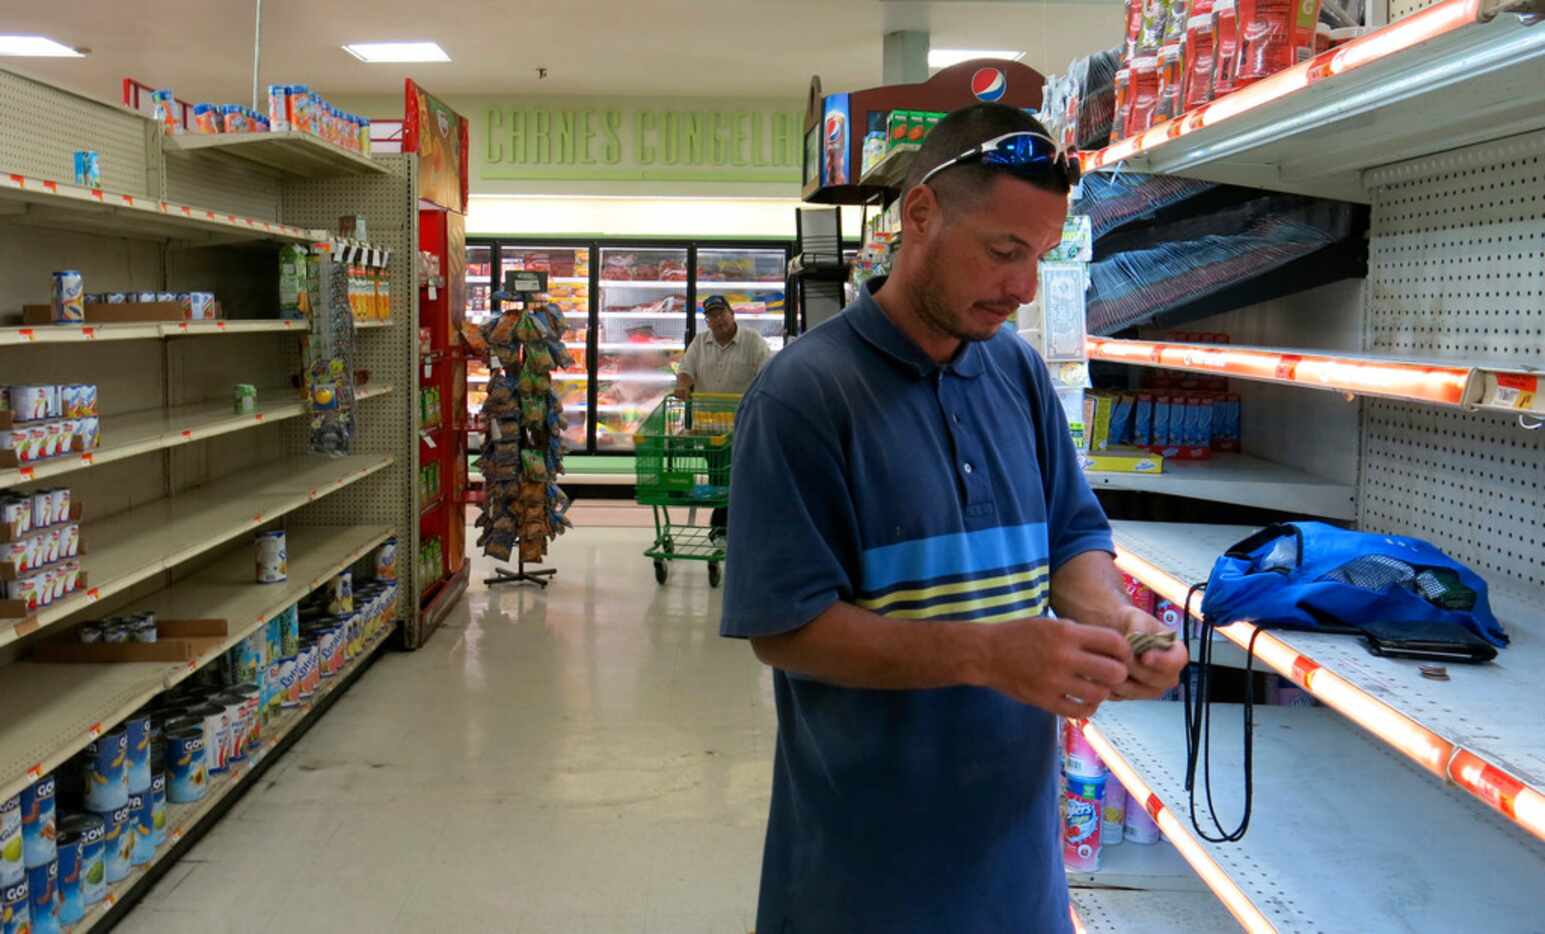 Christian Mendoza counts money in the aisle of a supermarket where he had hoped to buy...